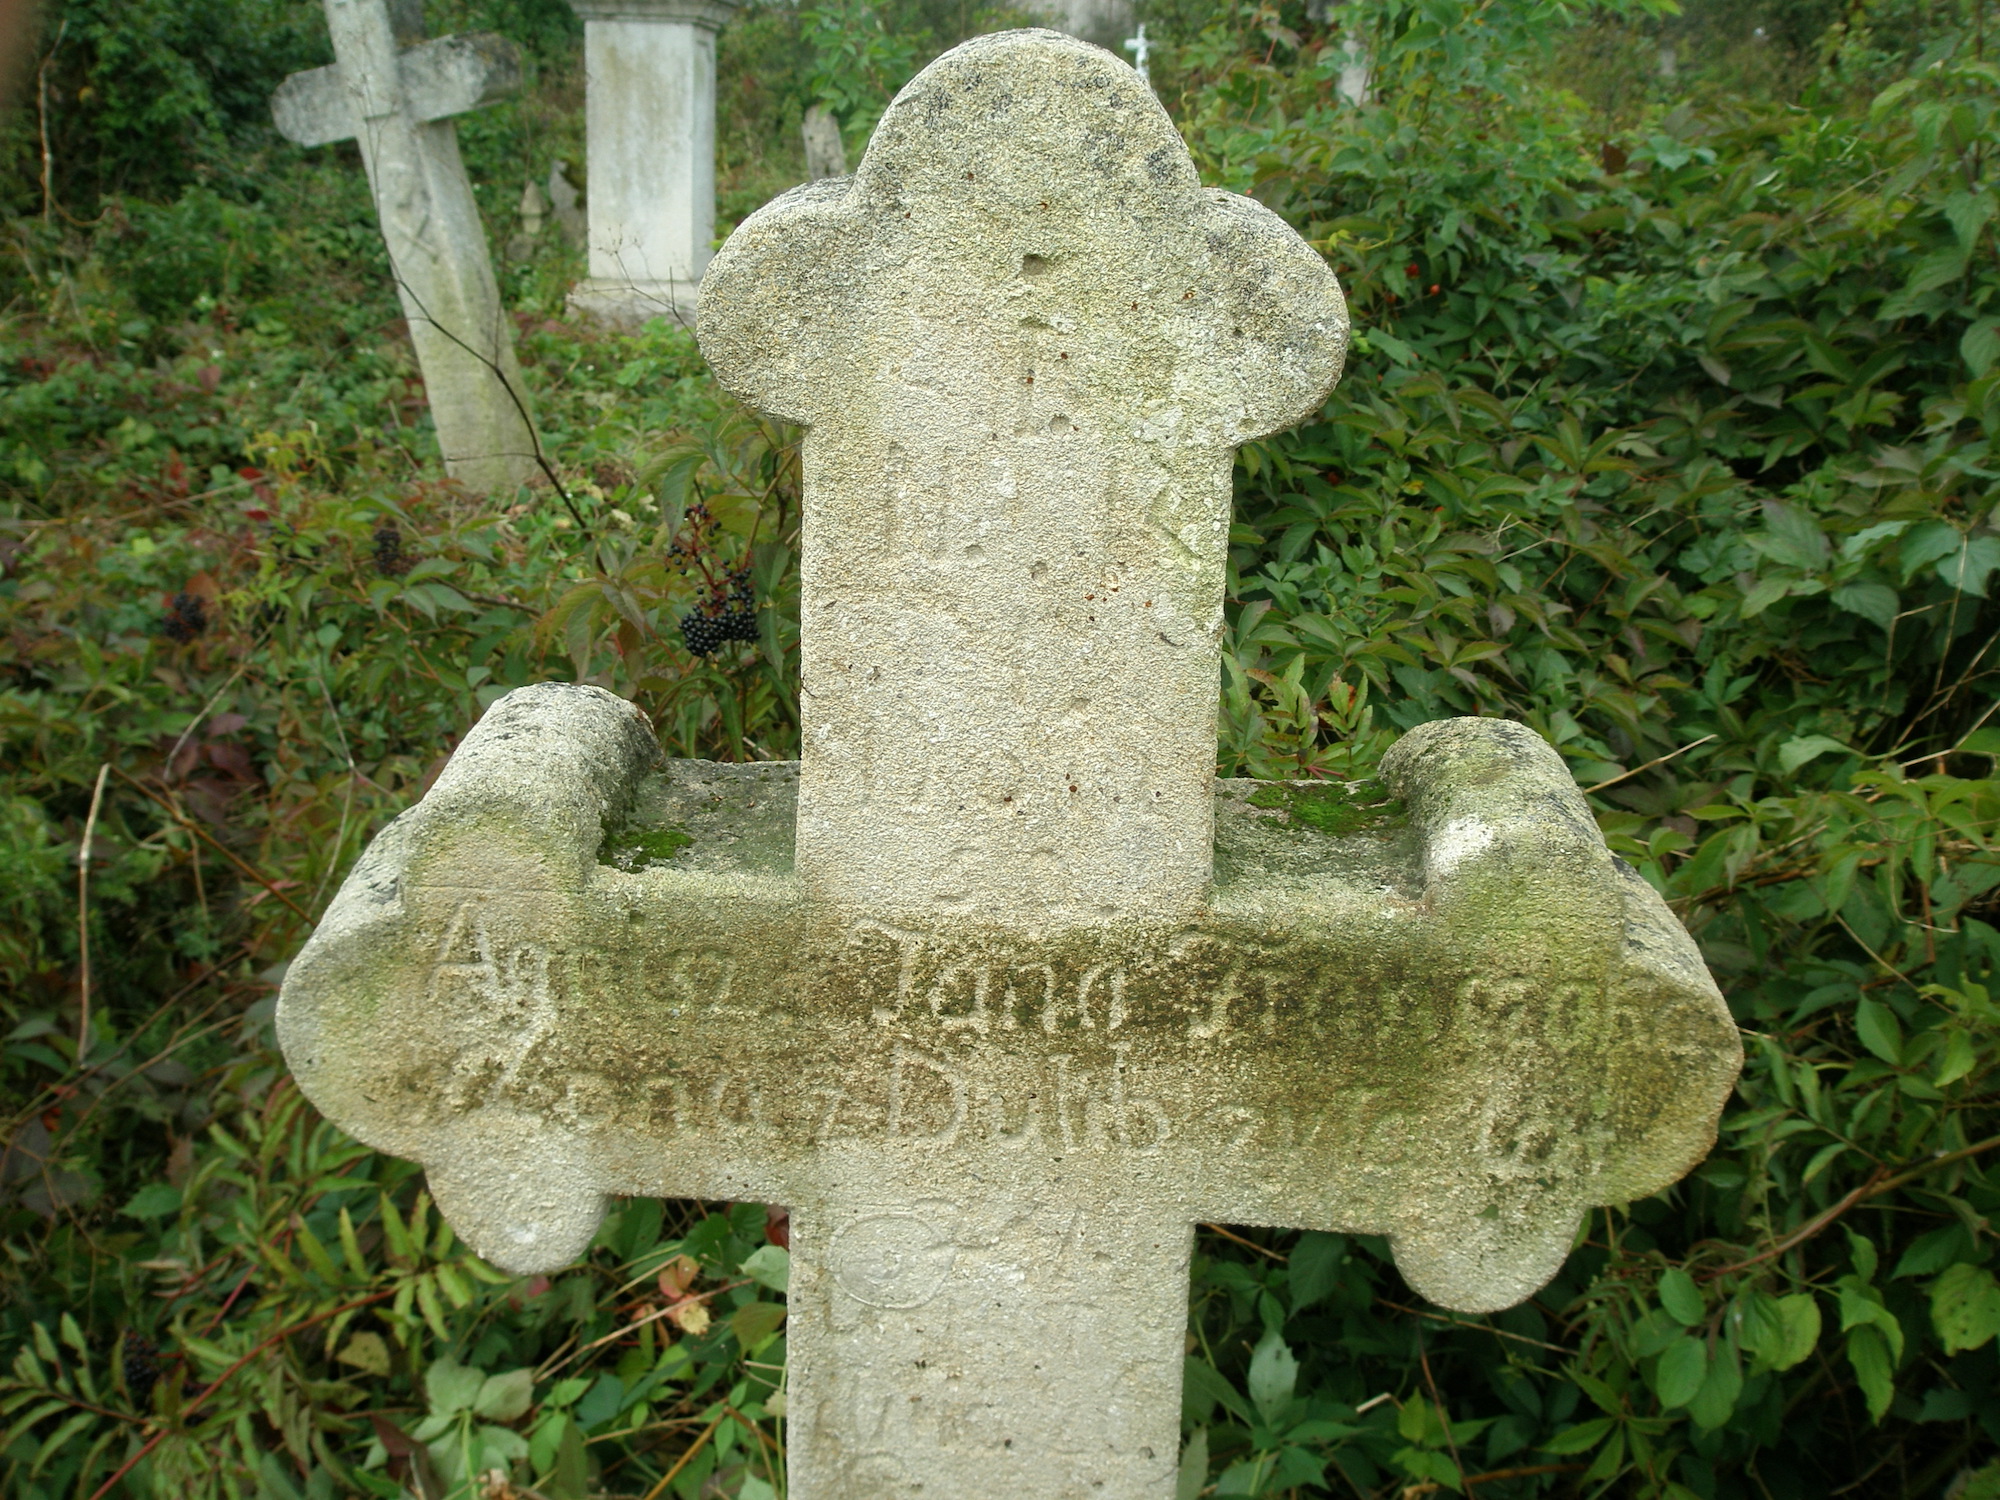 Tombstone of Franciszka Annisz, Jazłowiec cemetery, as of 2006.